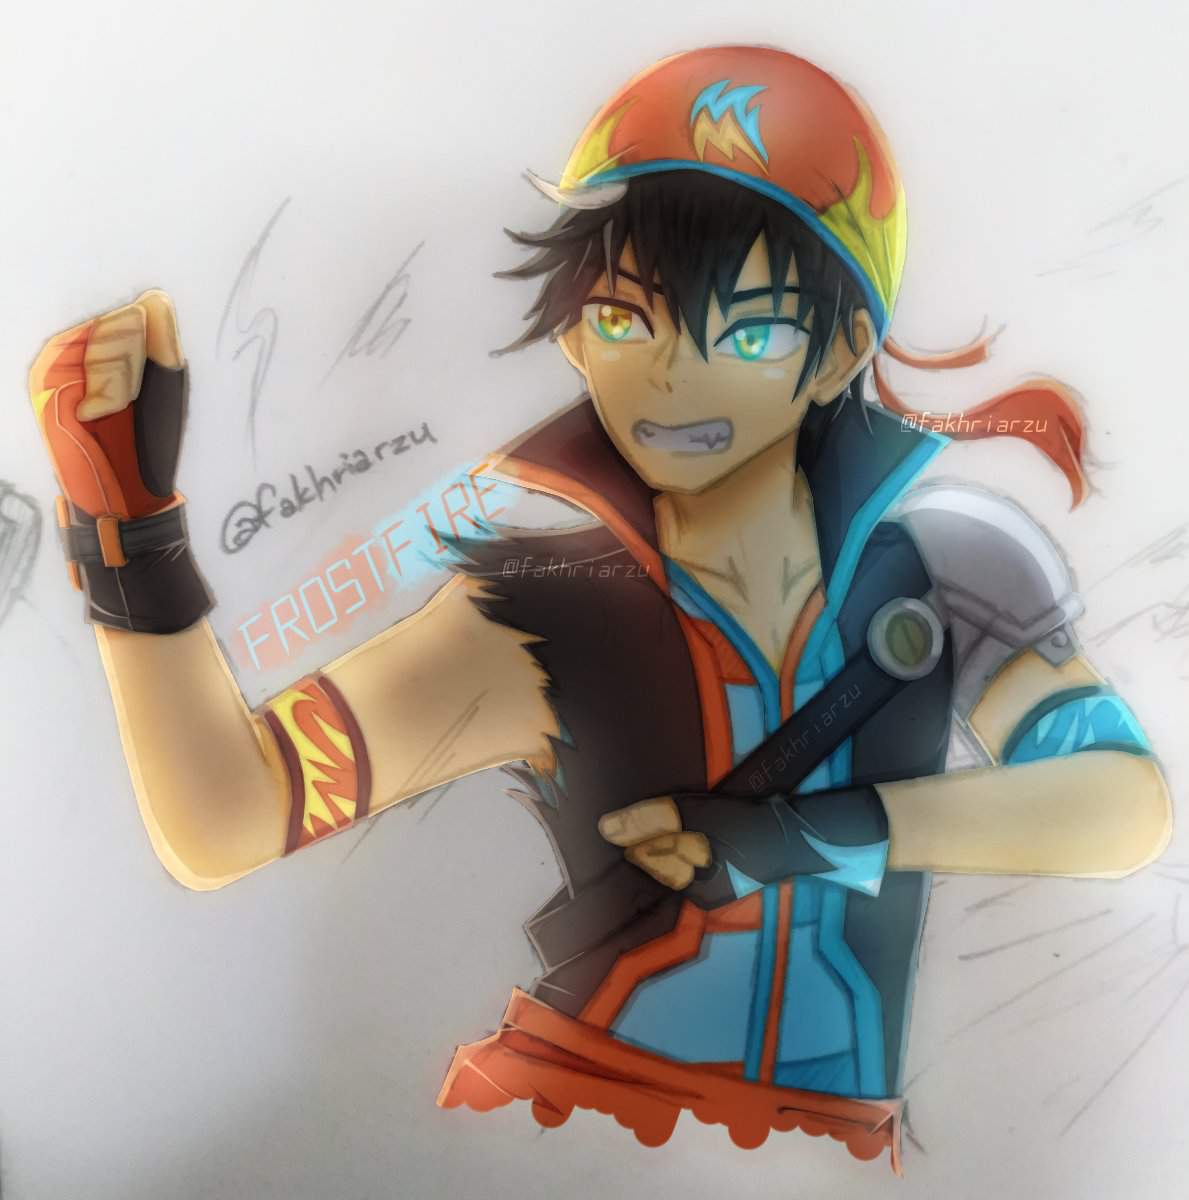 Boboiboy FrostFire but in his Pirate Disguise Uniform